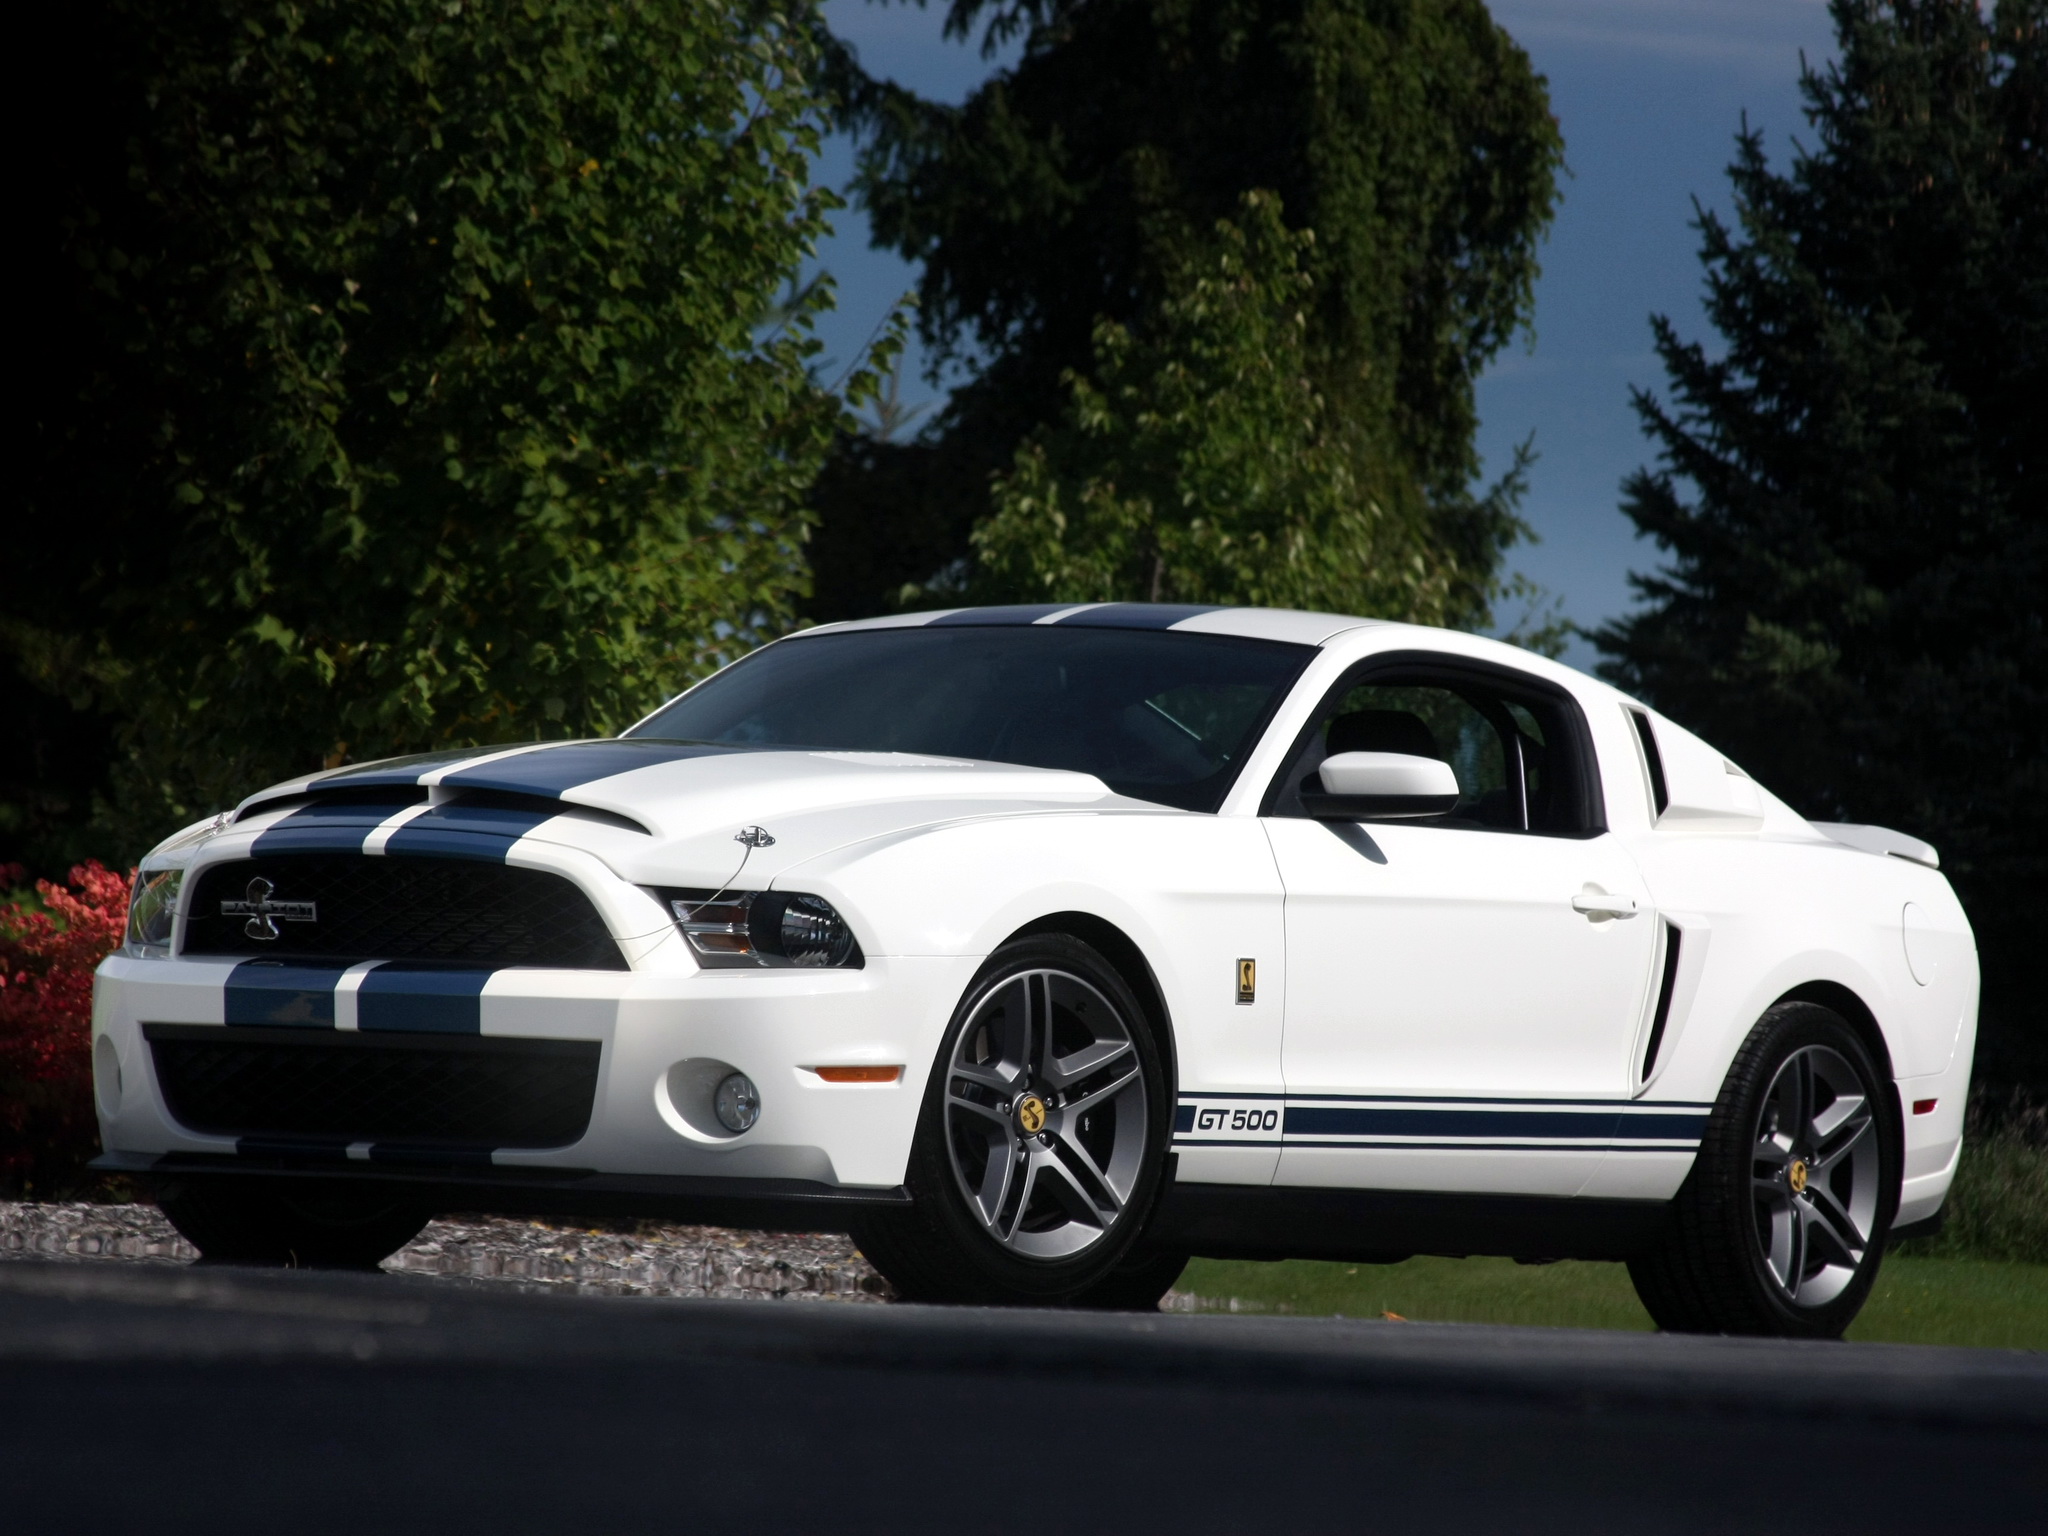 2009, Shelby, Gt500, Patriot, Ford, Mustang, Muscle Wallpaper